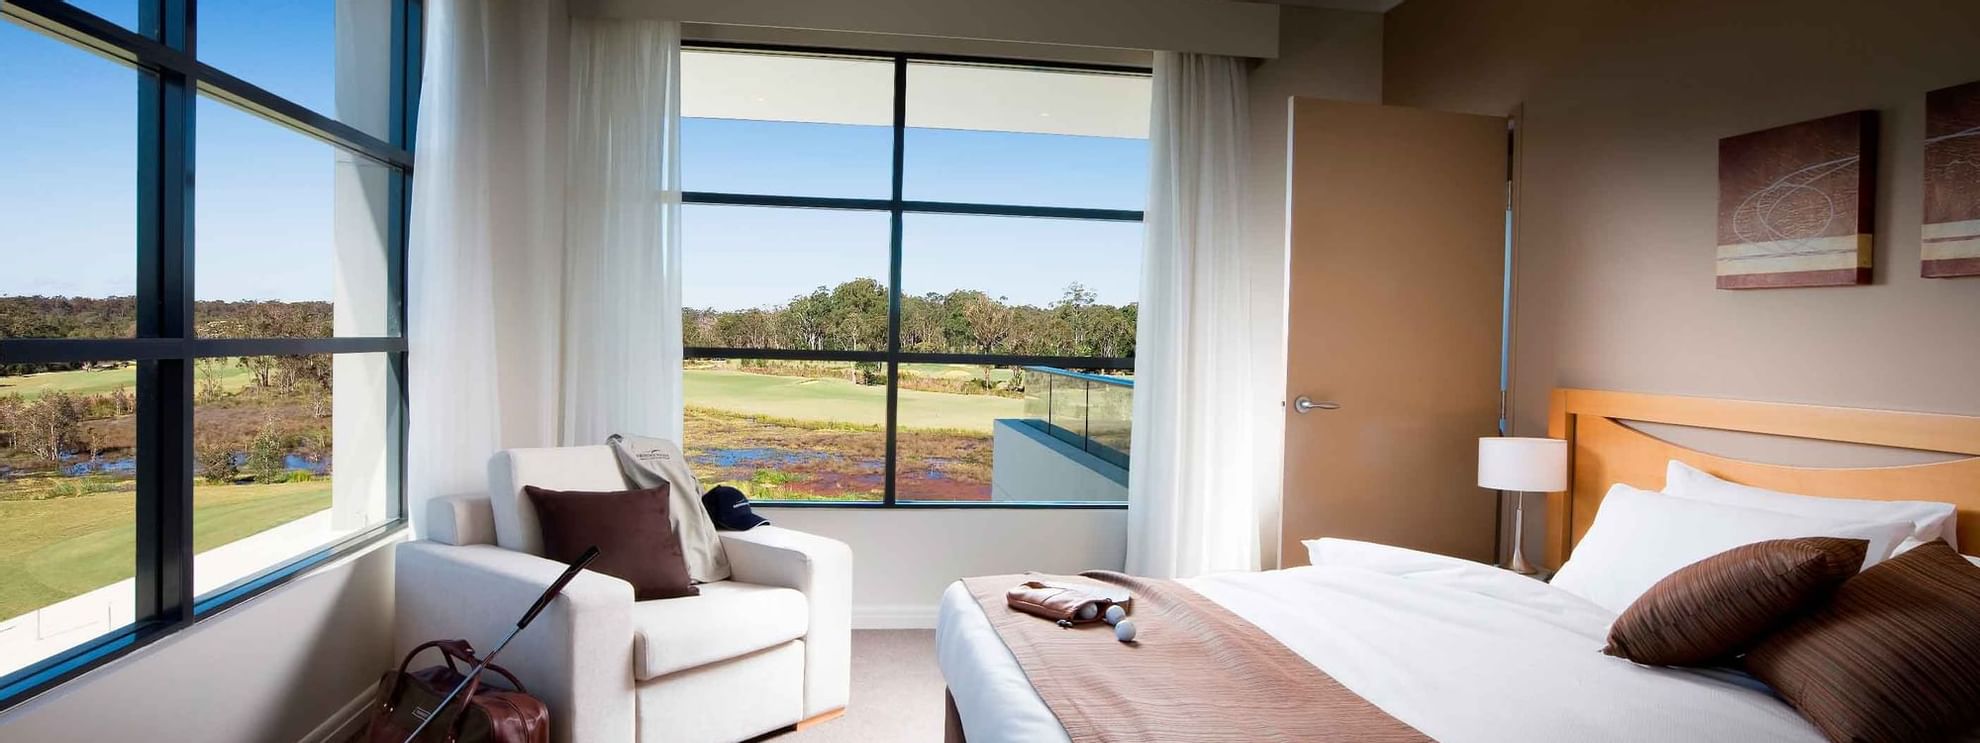 Golf stay and play packages on the central coast